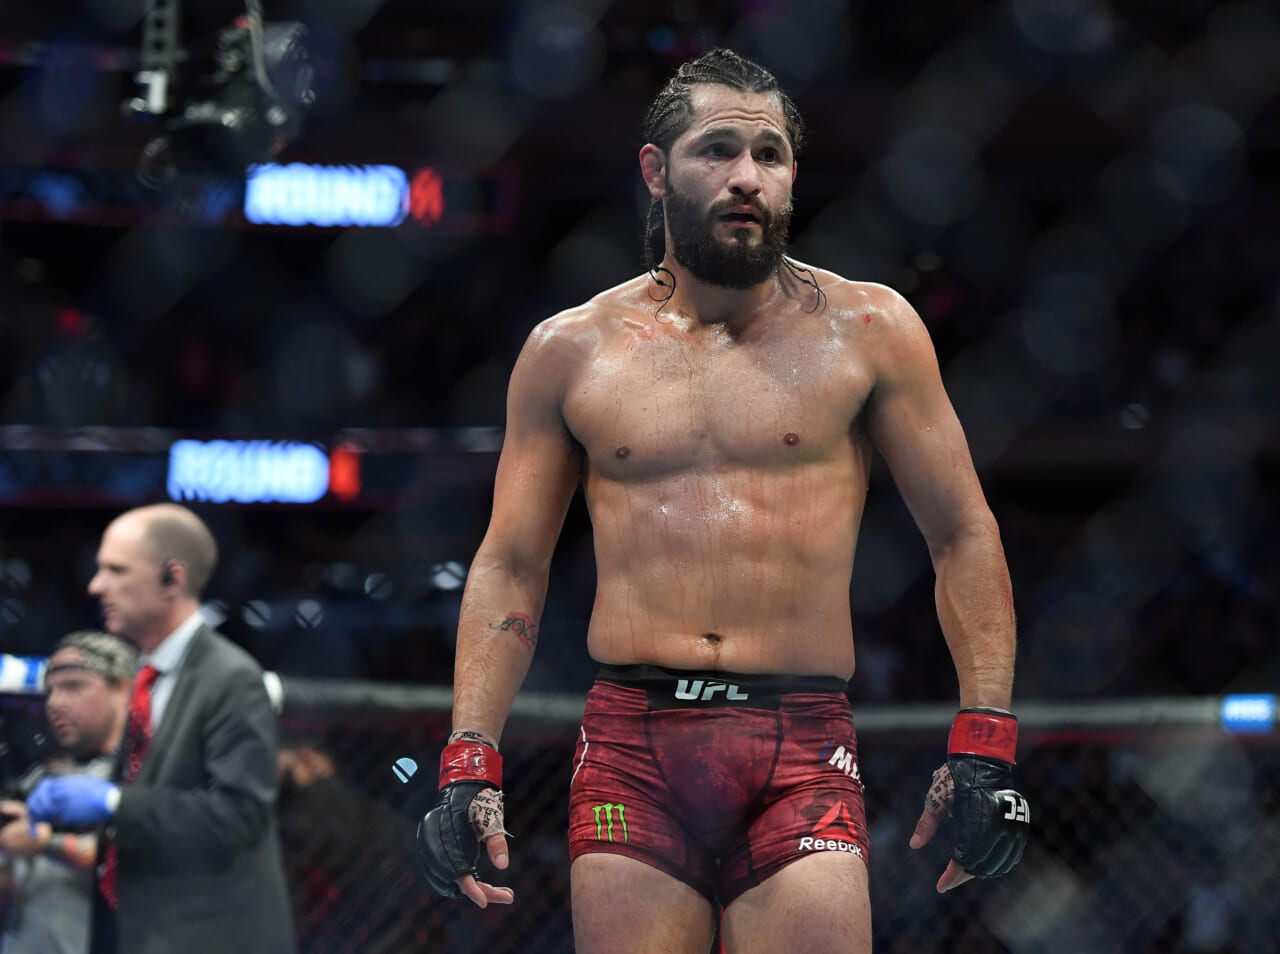 Jorge Masvidal acknowledges his career is on the line at UFC 287: “This could be the last one”